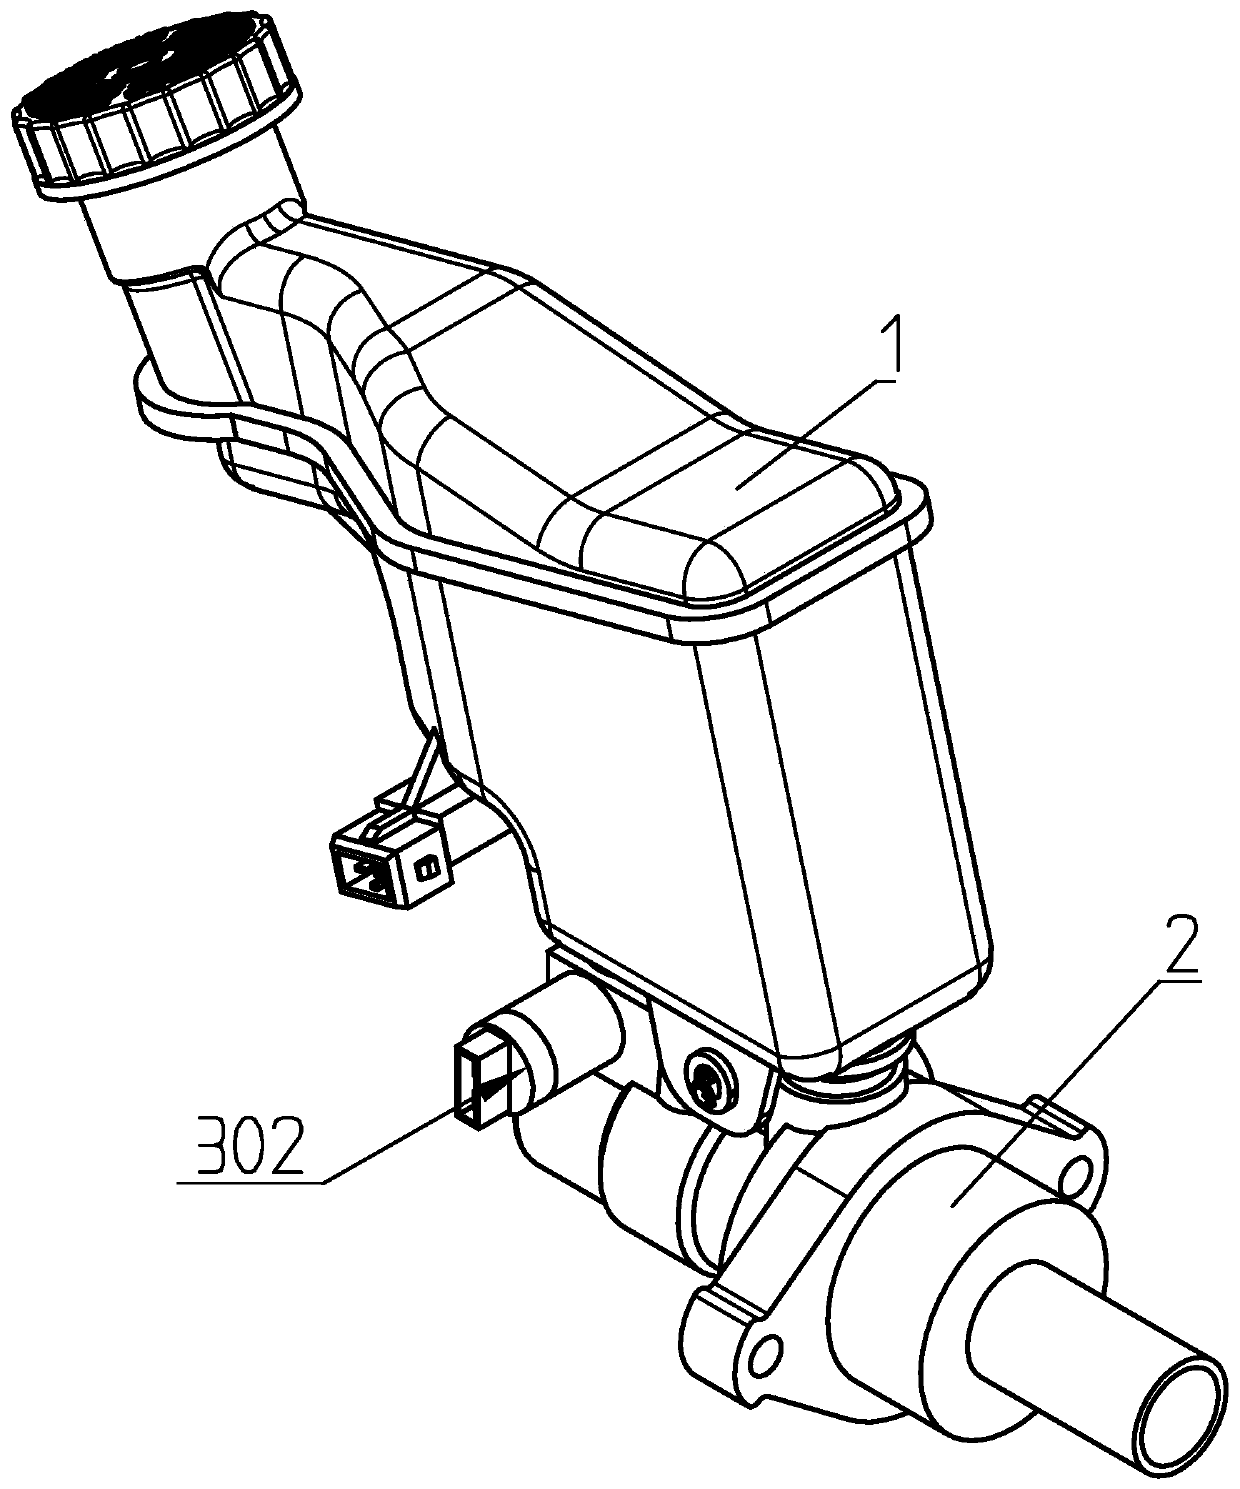 Brake master cylinder with normally-closed valve